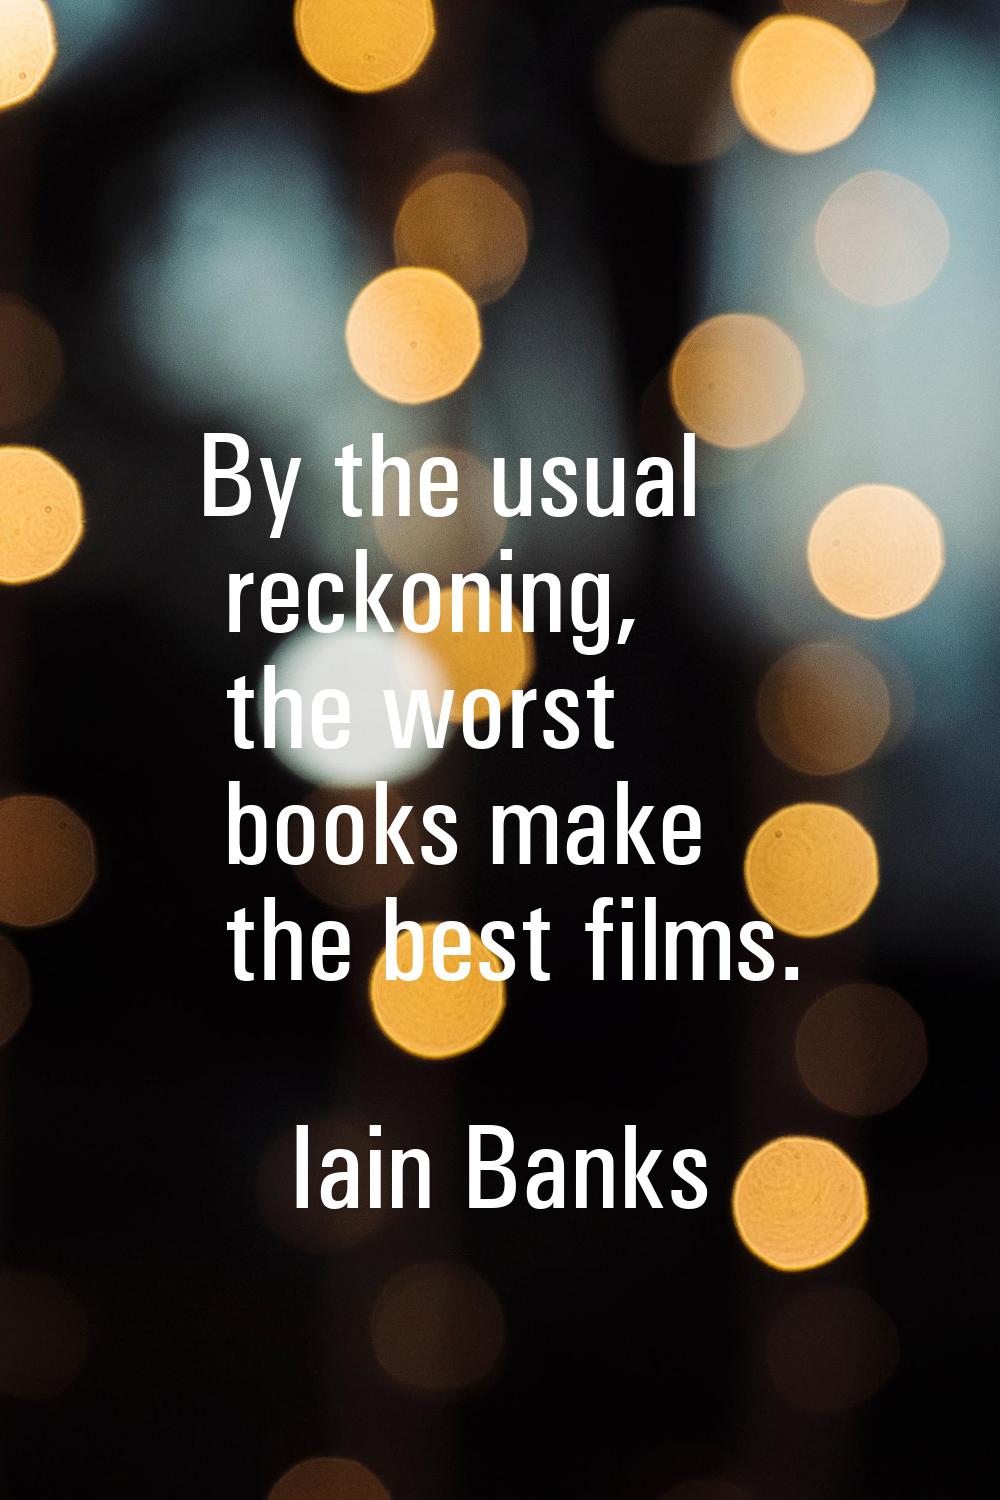 By the usual reckoning, the worst books make the best films.